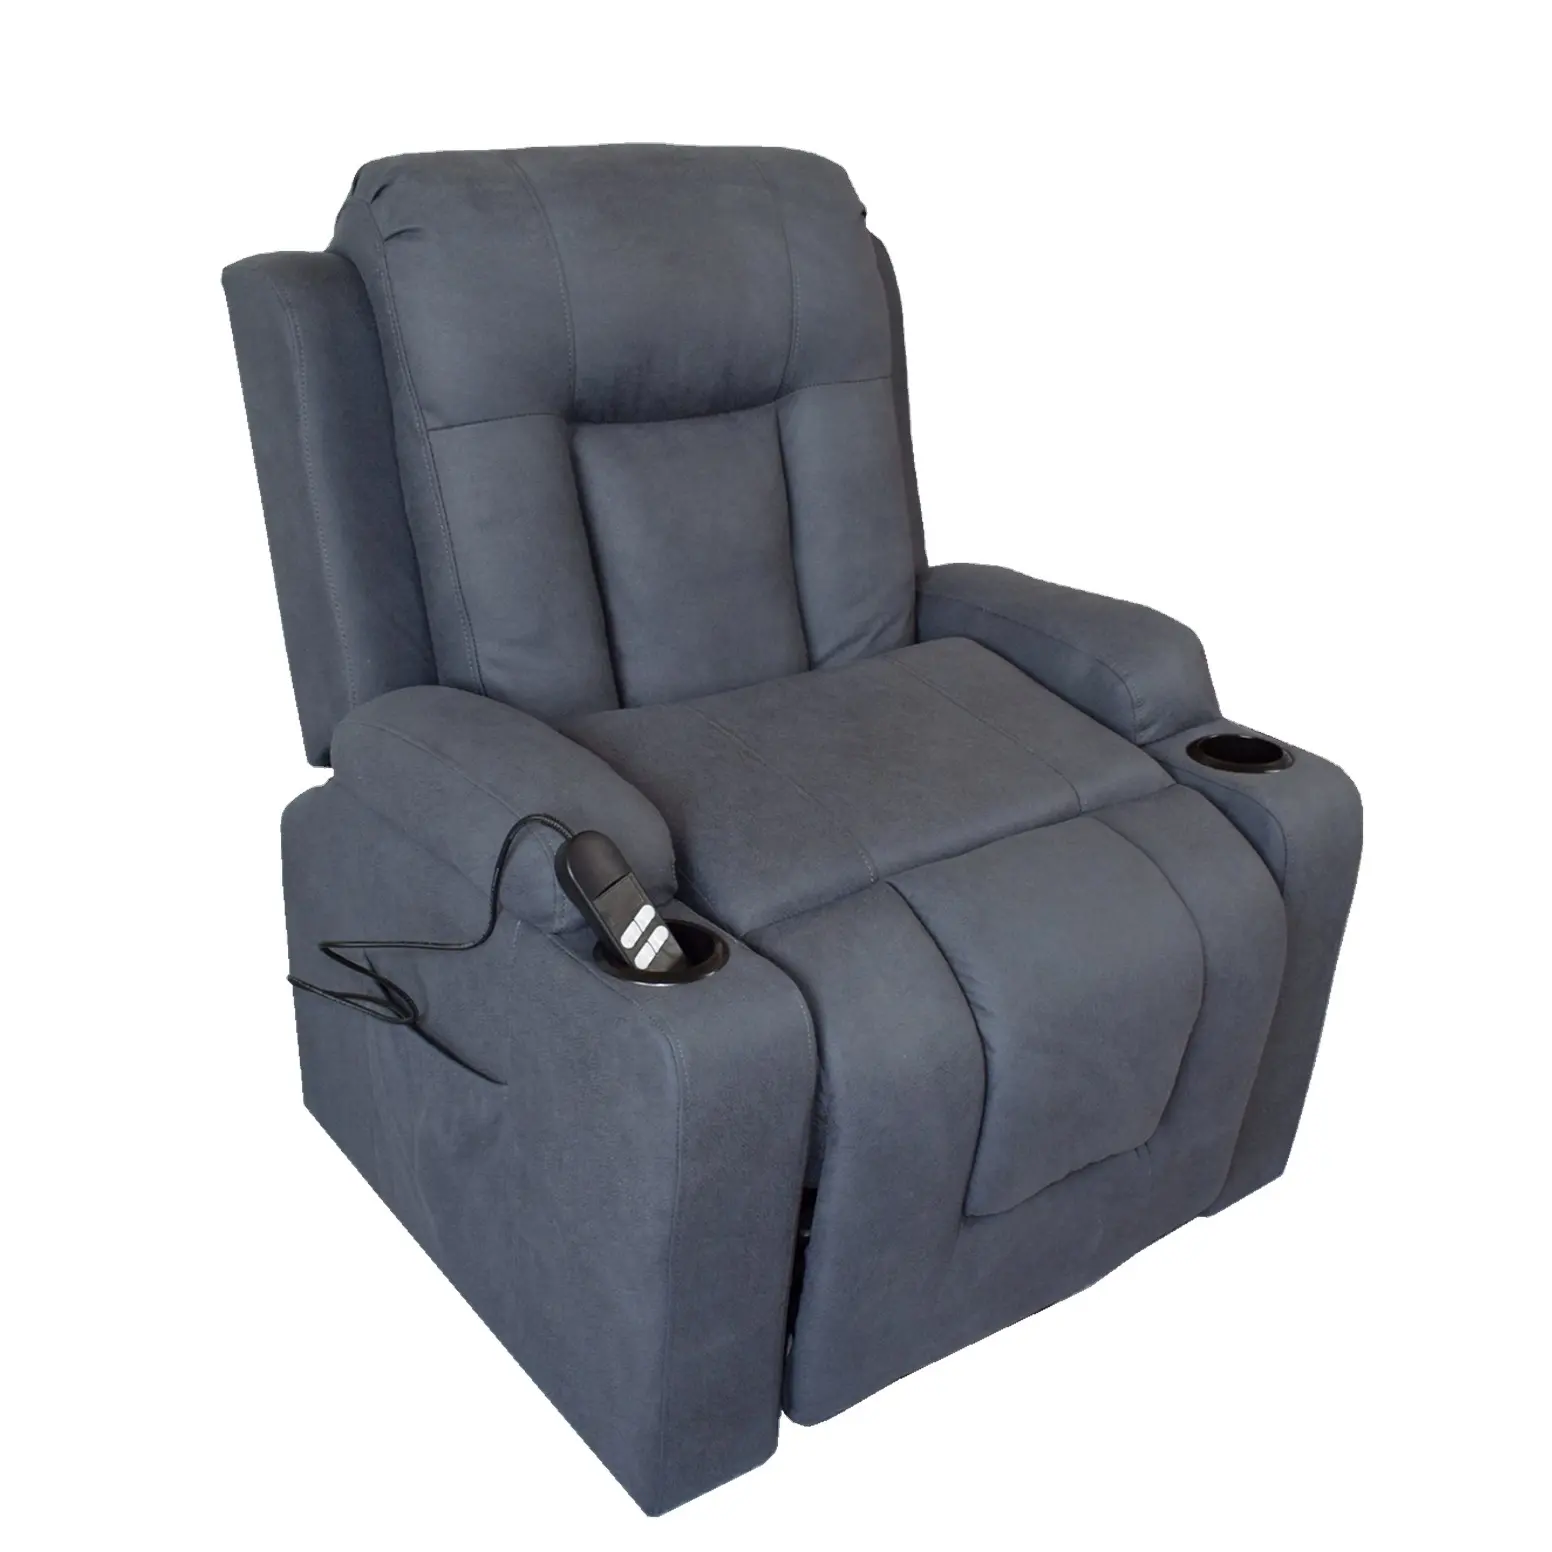 JKY Furniture NEW 4 positional Ultimate Lift Seat recliner Chair The World latest, most innovative practical recliner on market